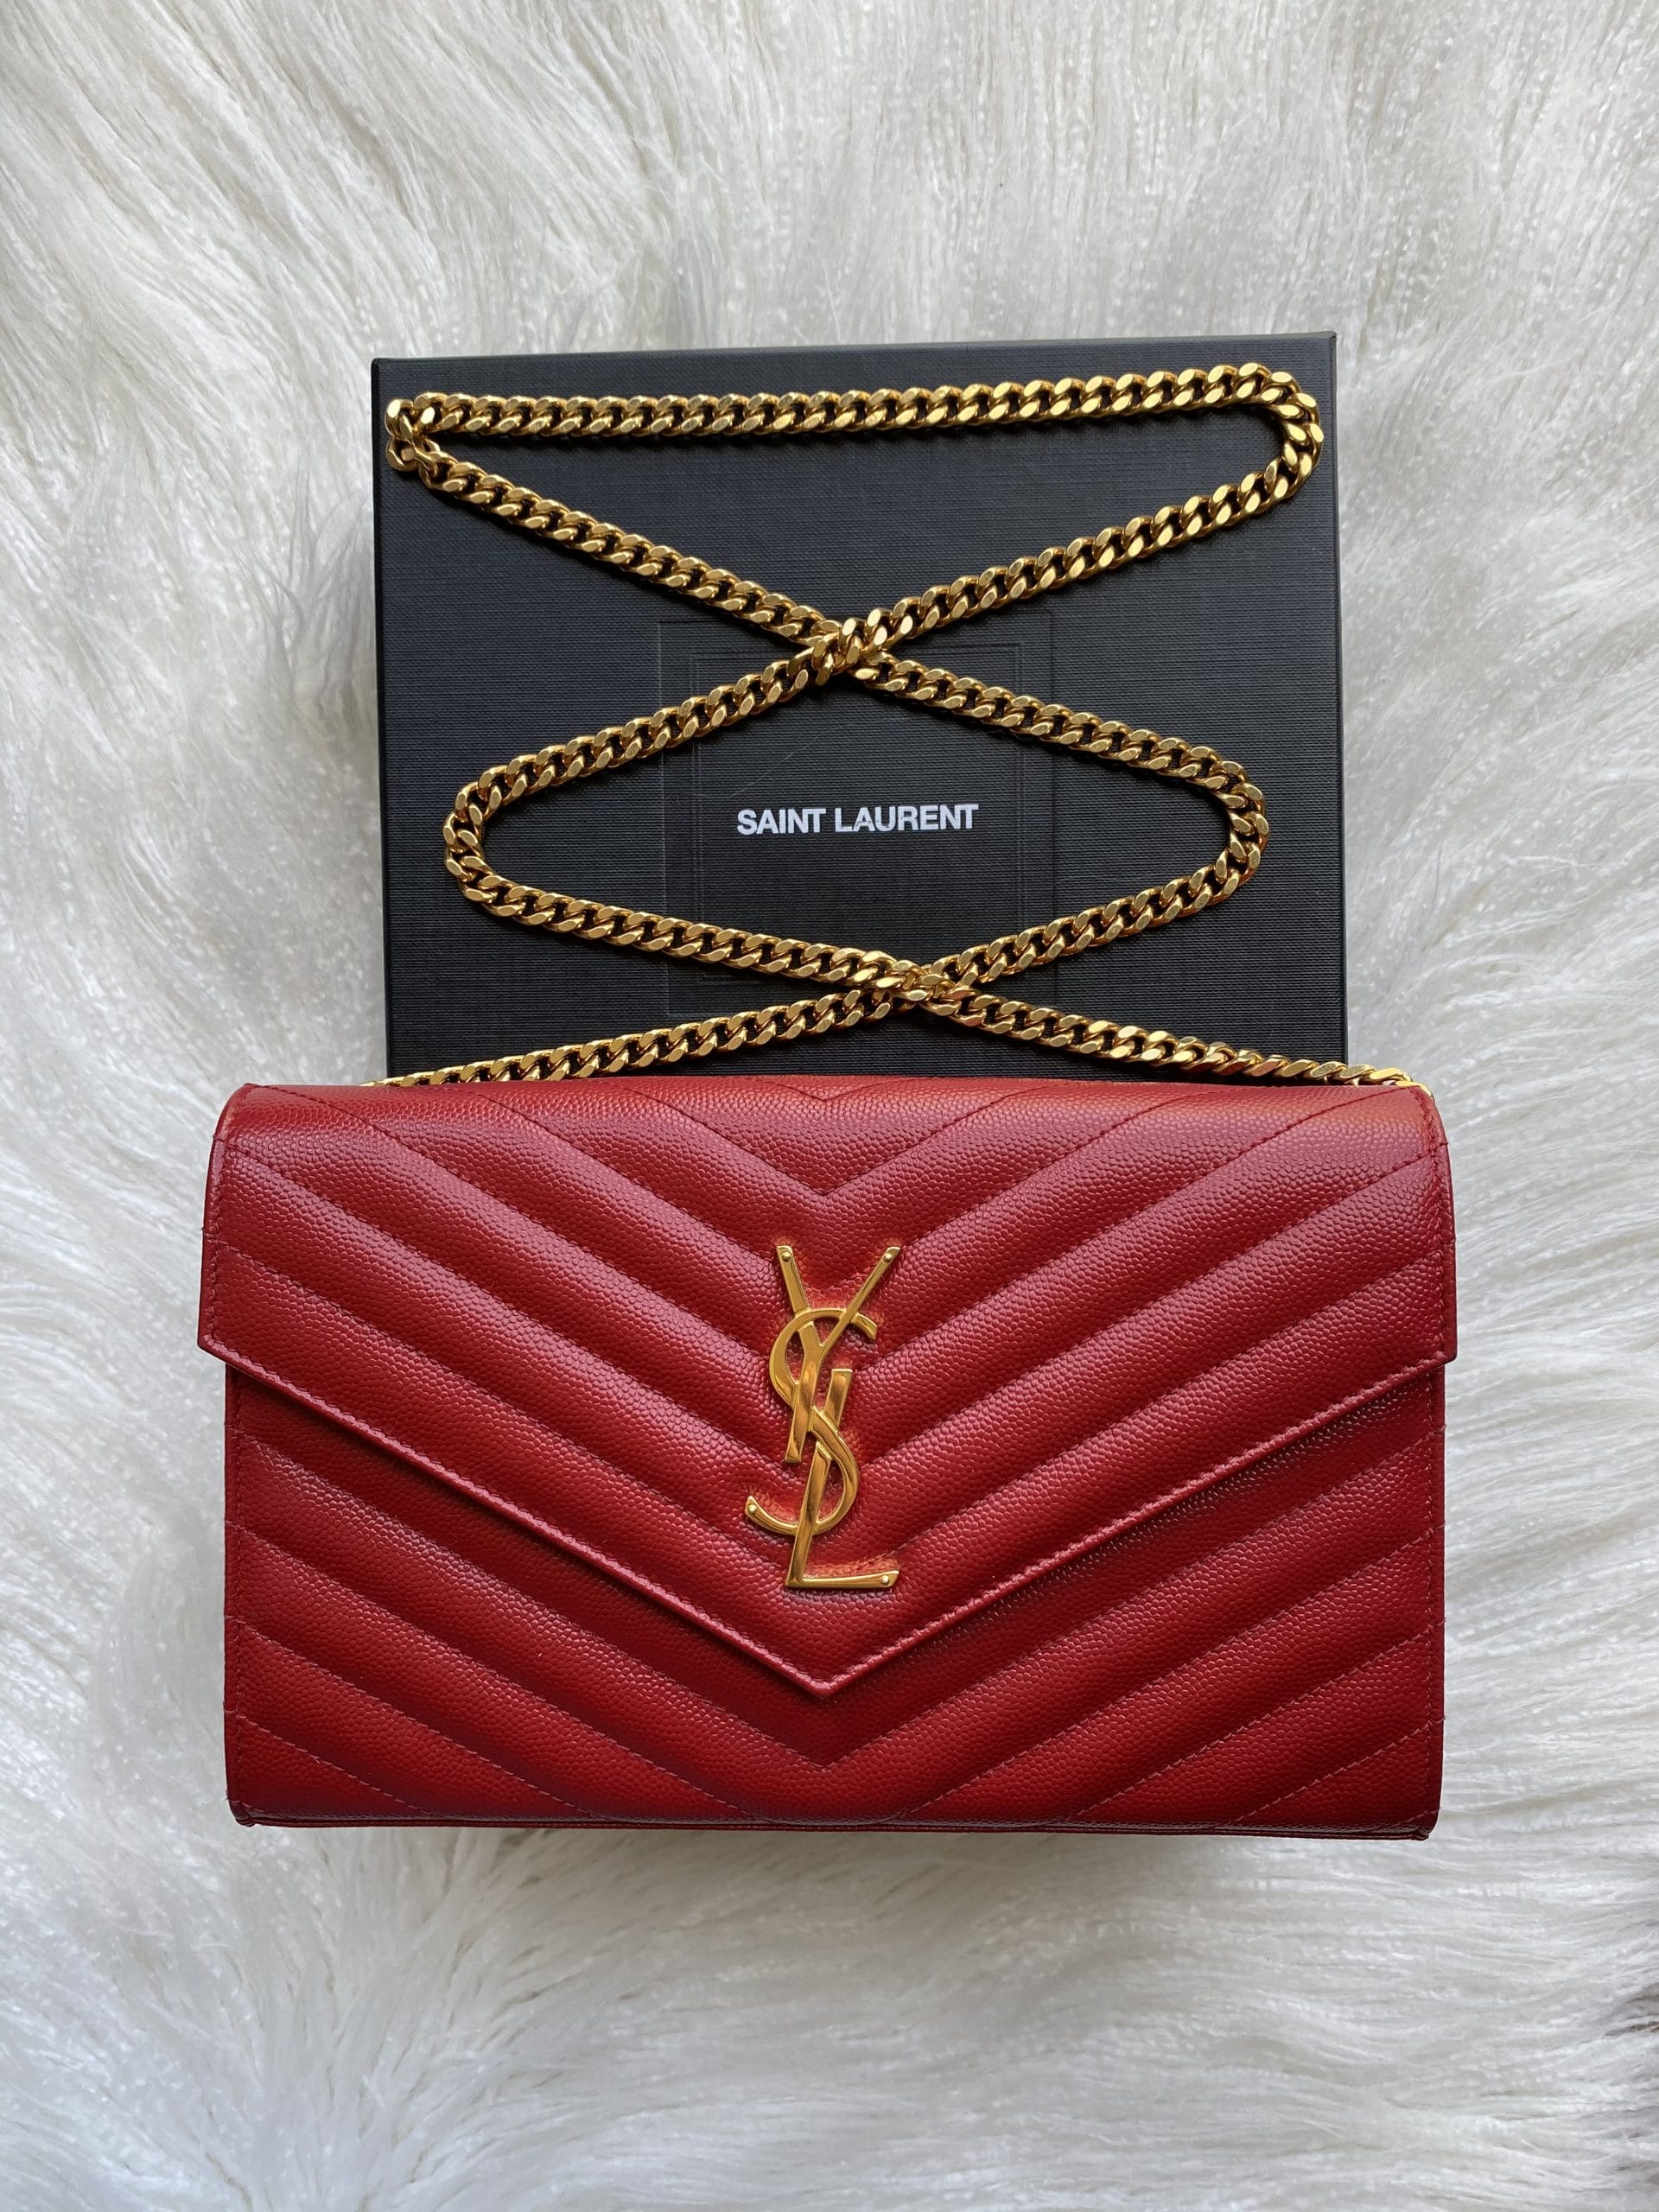 How to Spot Fake vs. Real YSL Bags: 9 Things to Look For